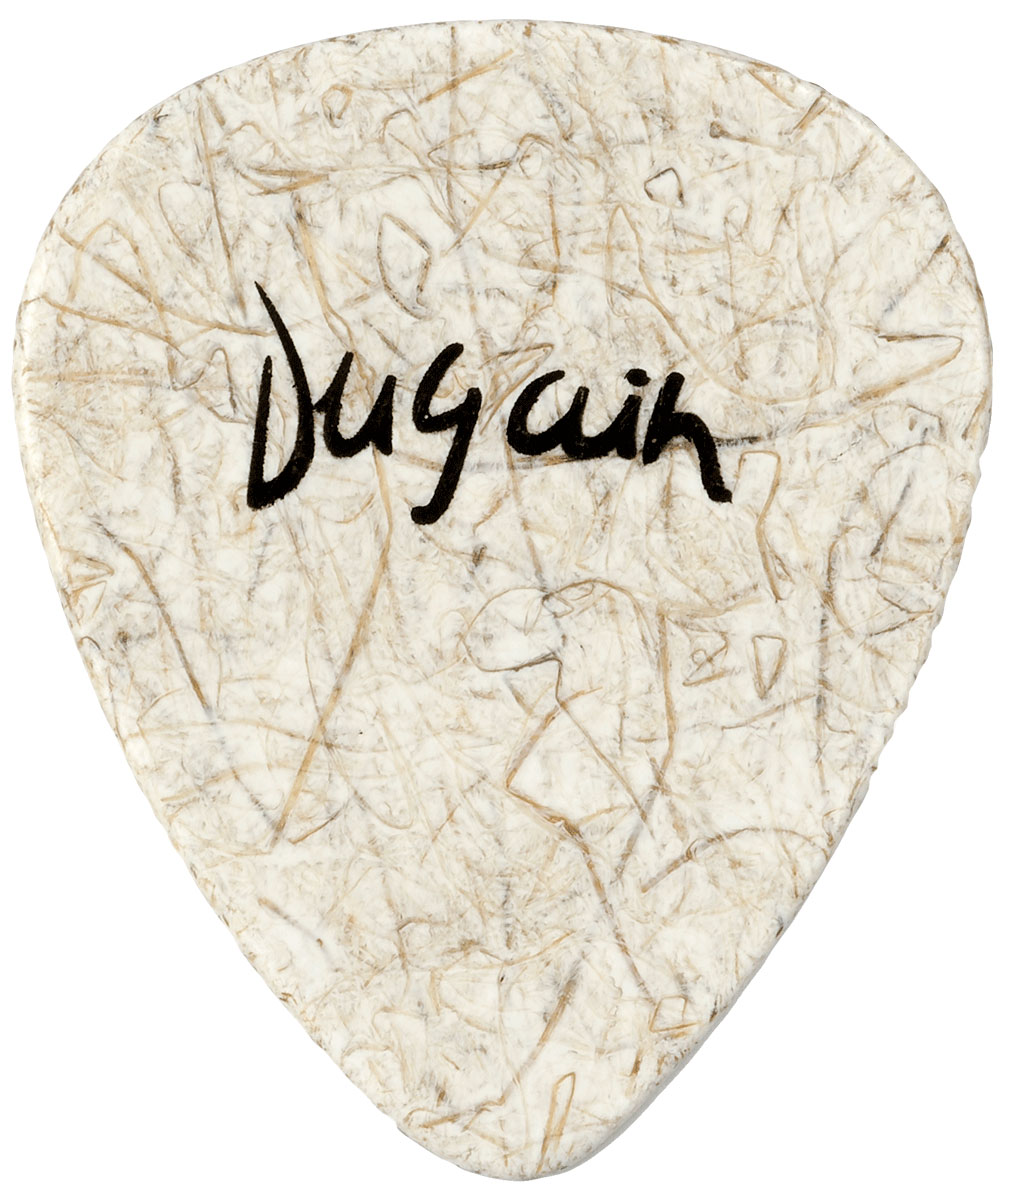 DUGAIN X2 HANDCRAFTED KAIRLIN GUITAR PICKS, 1,2MM AND 0,96MM